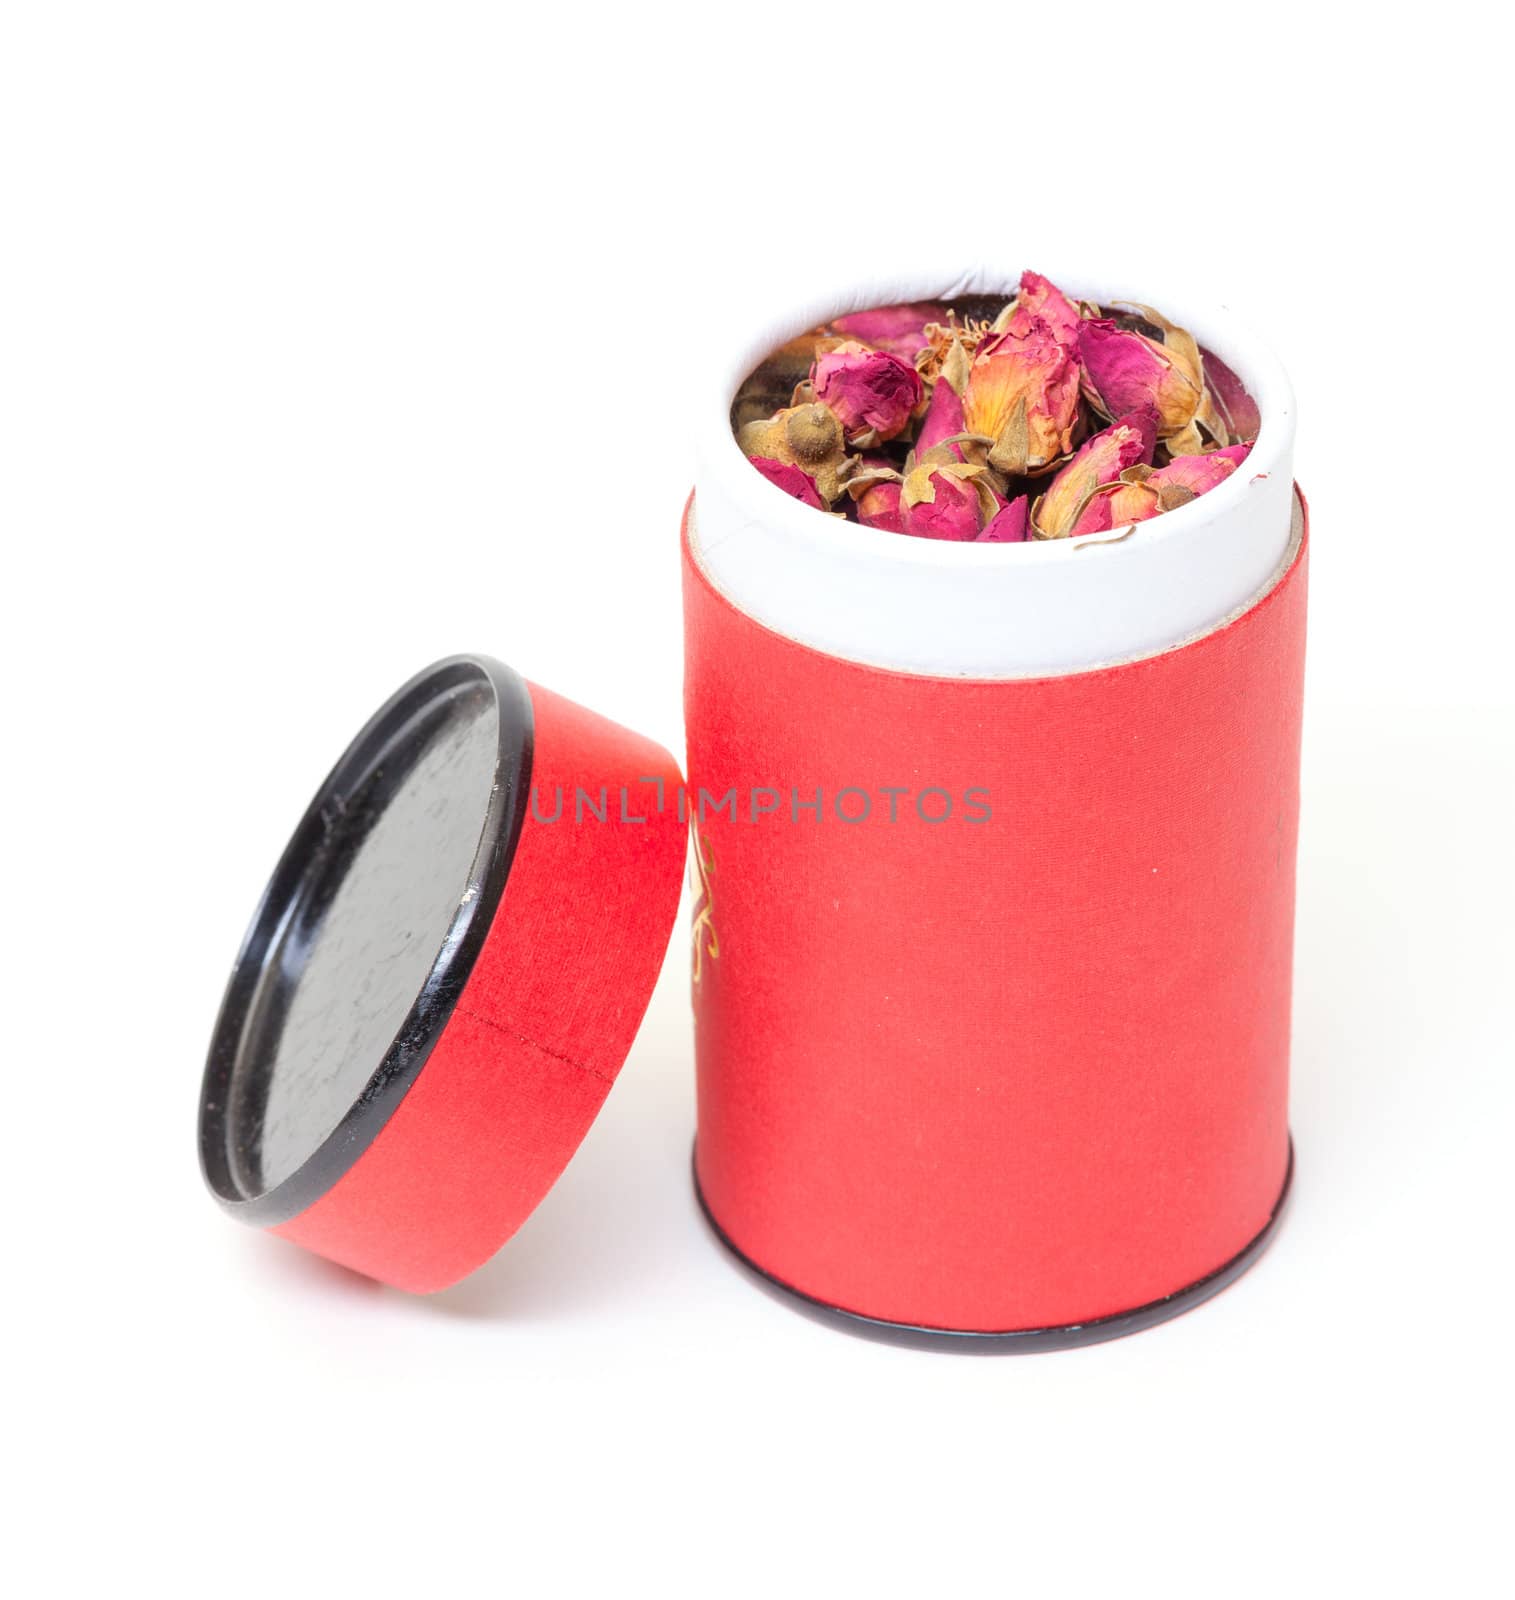 Dried Rosebuds in red can, on white background